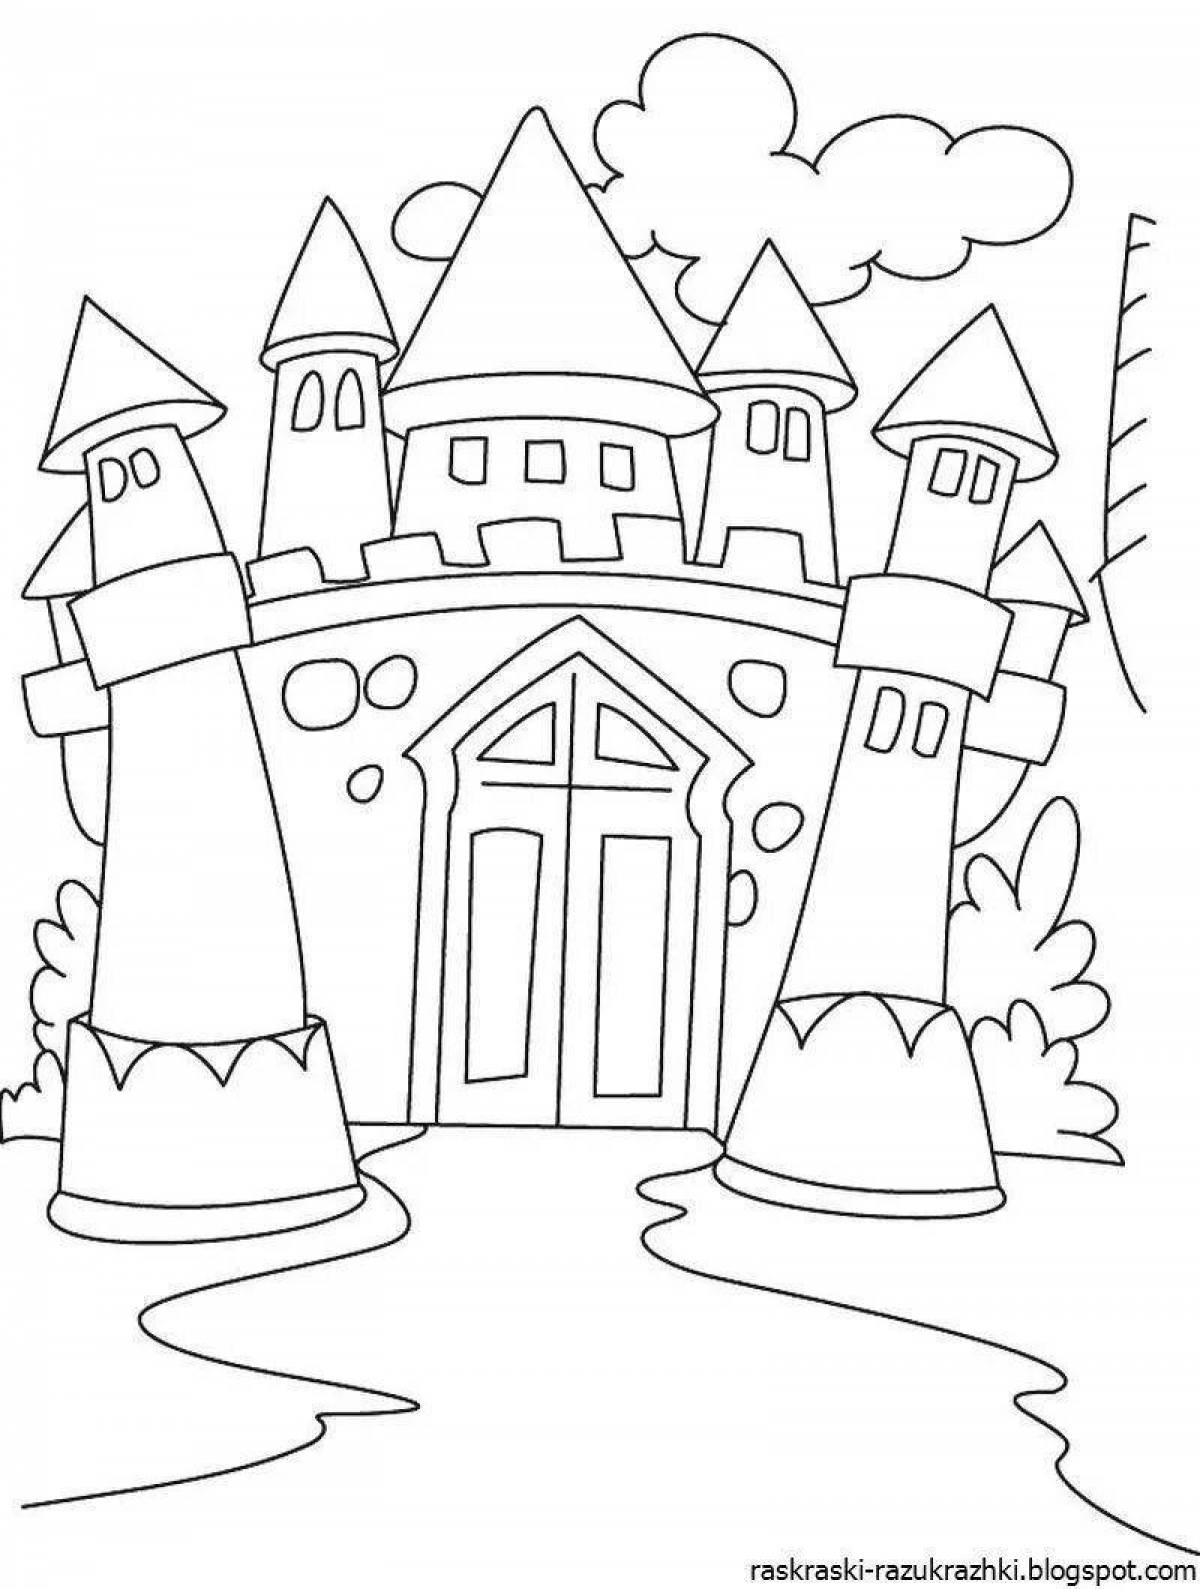 Luxury princess castle coloring book for kids